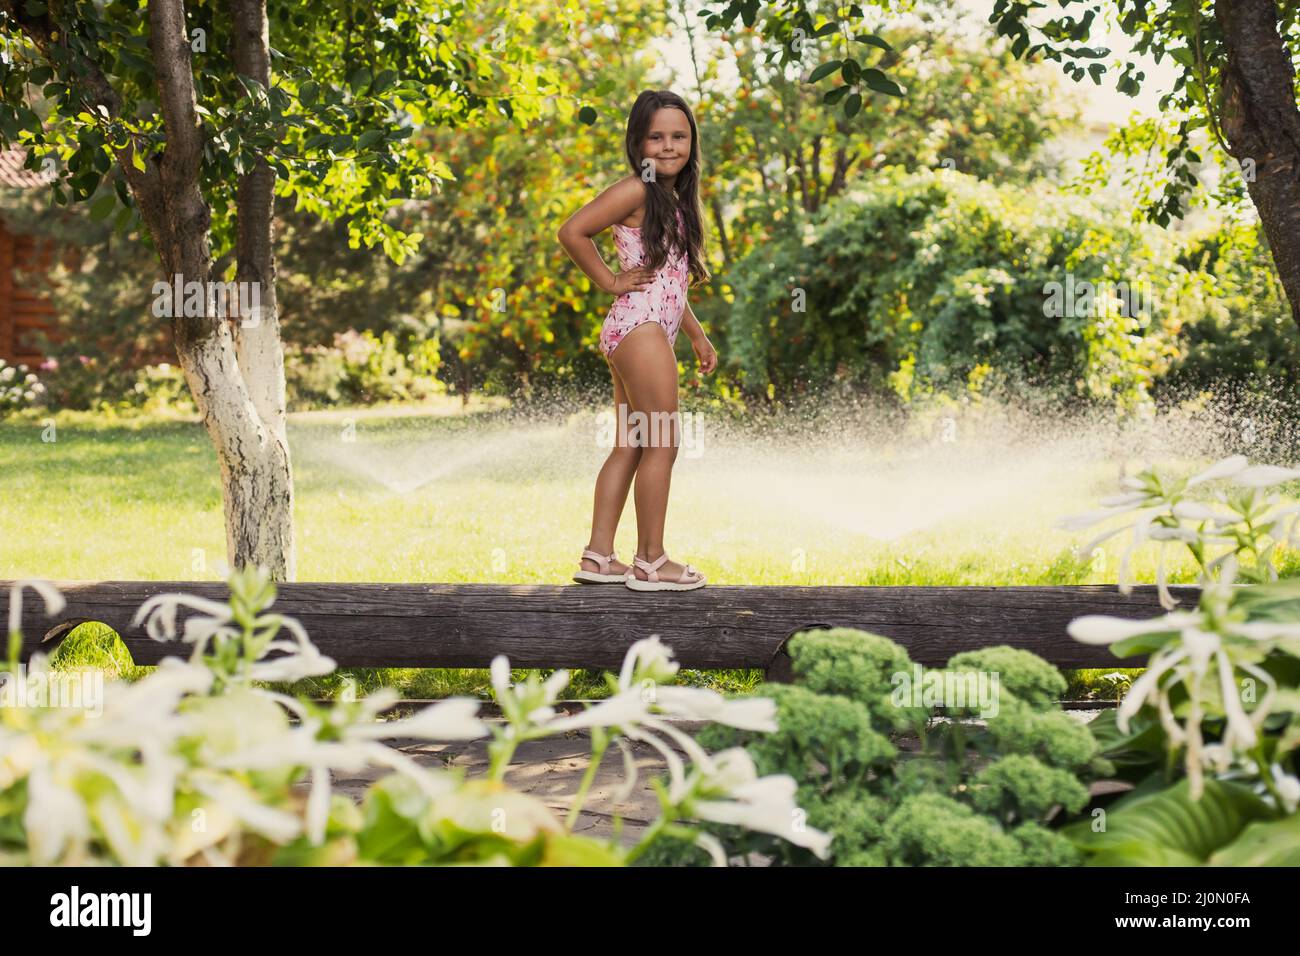 Small playing girl on log smiling looking at camera balancing indulging with water sprinklers, house and green trees in background in daytime Stock Photo